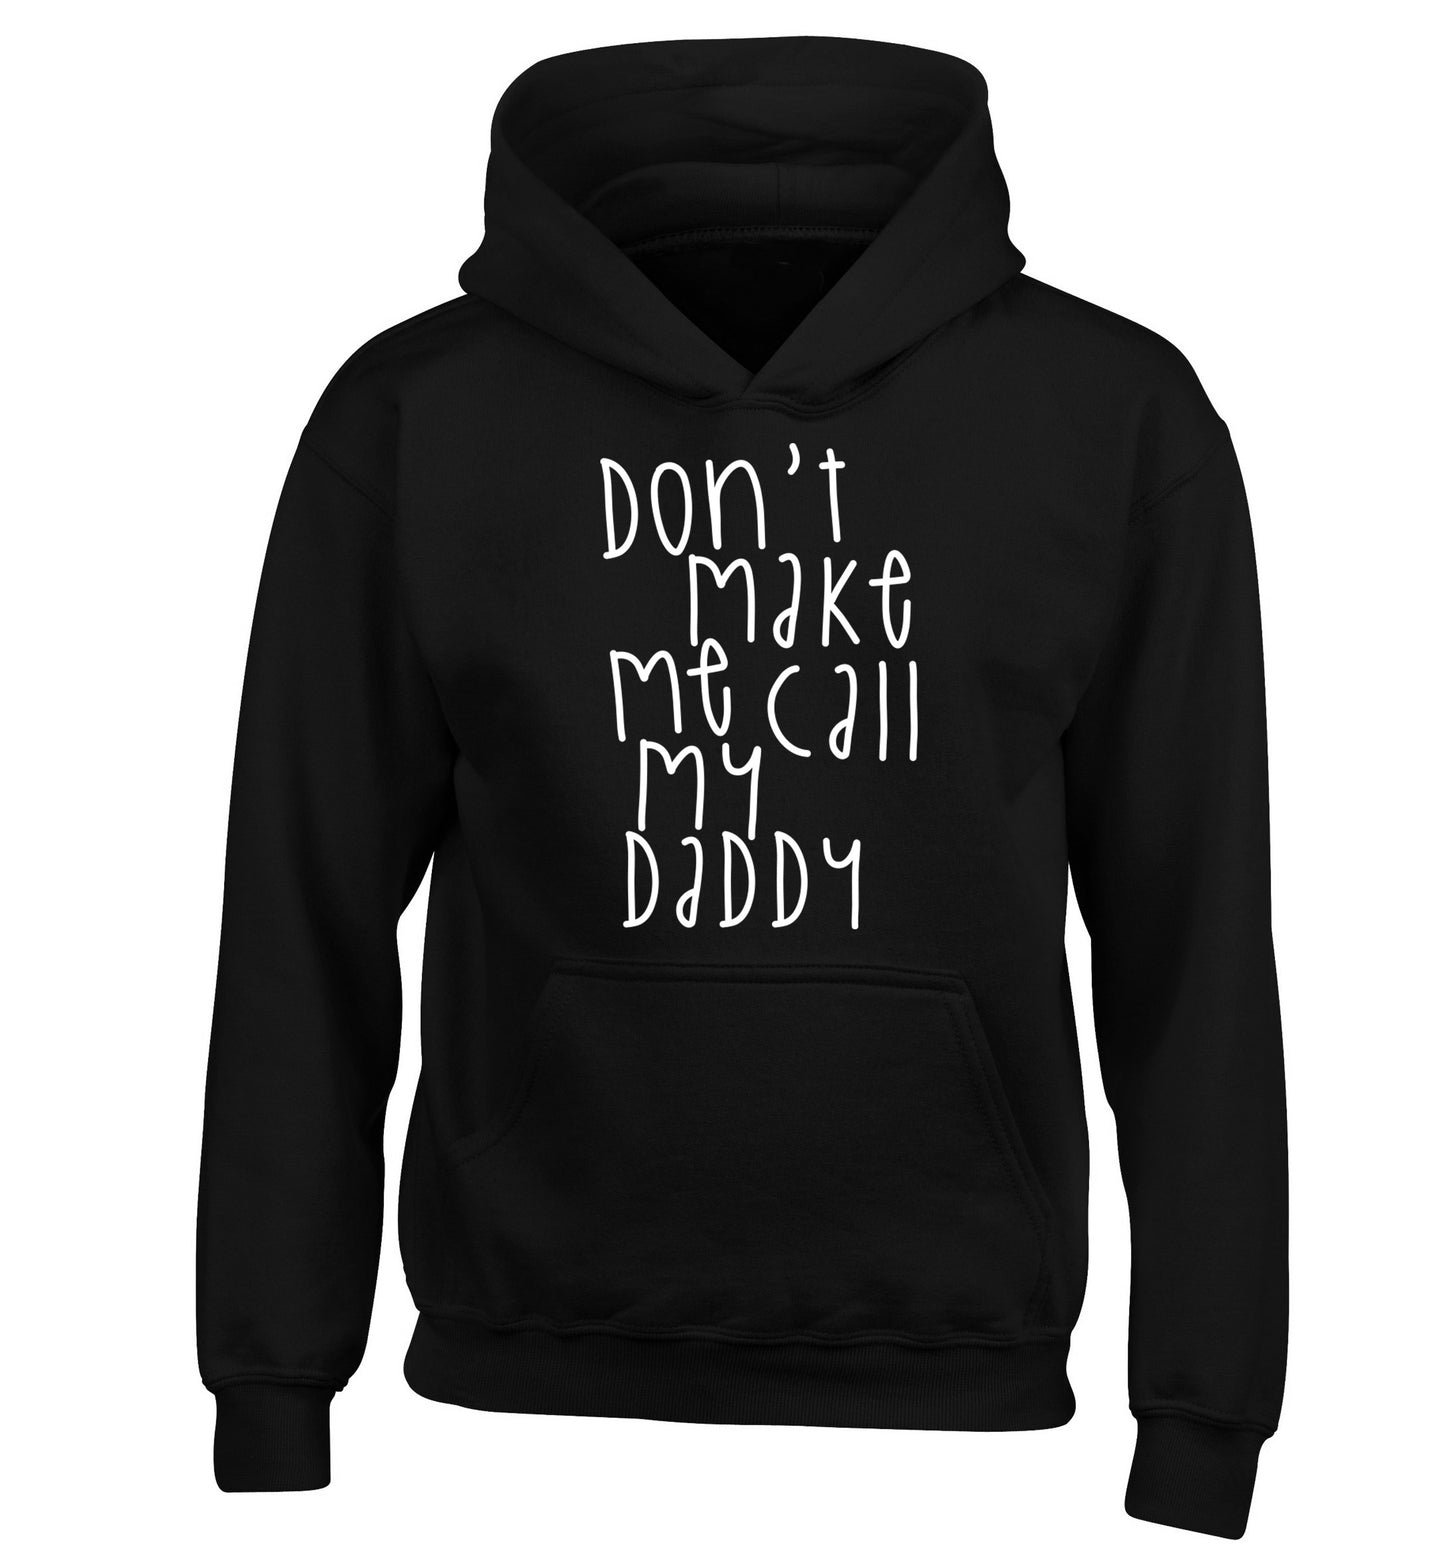 Don't make me call my daddy children's black hoodie 12-14 Years